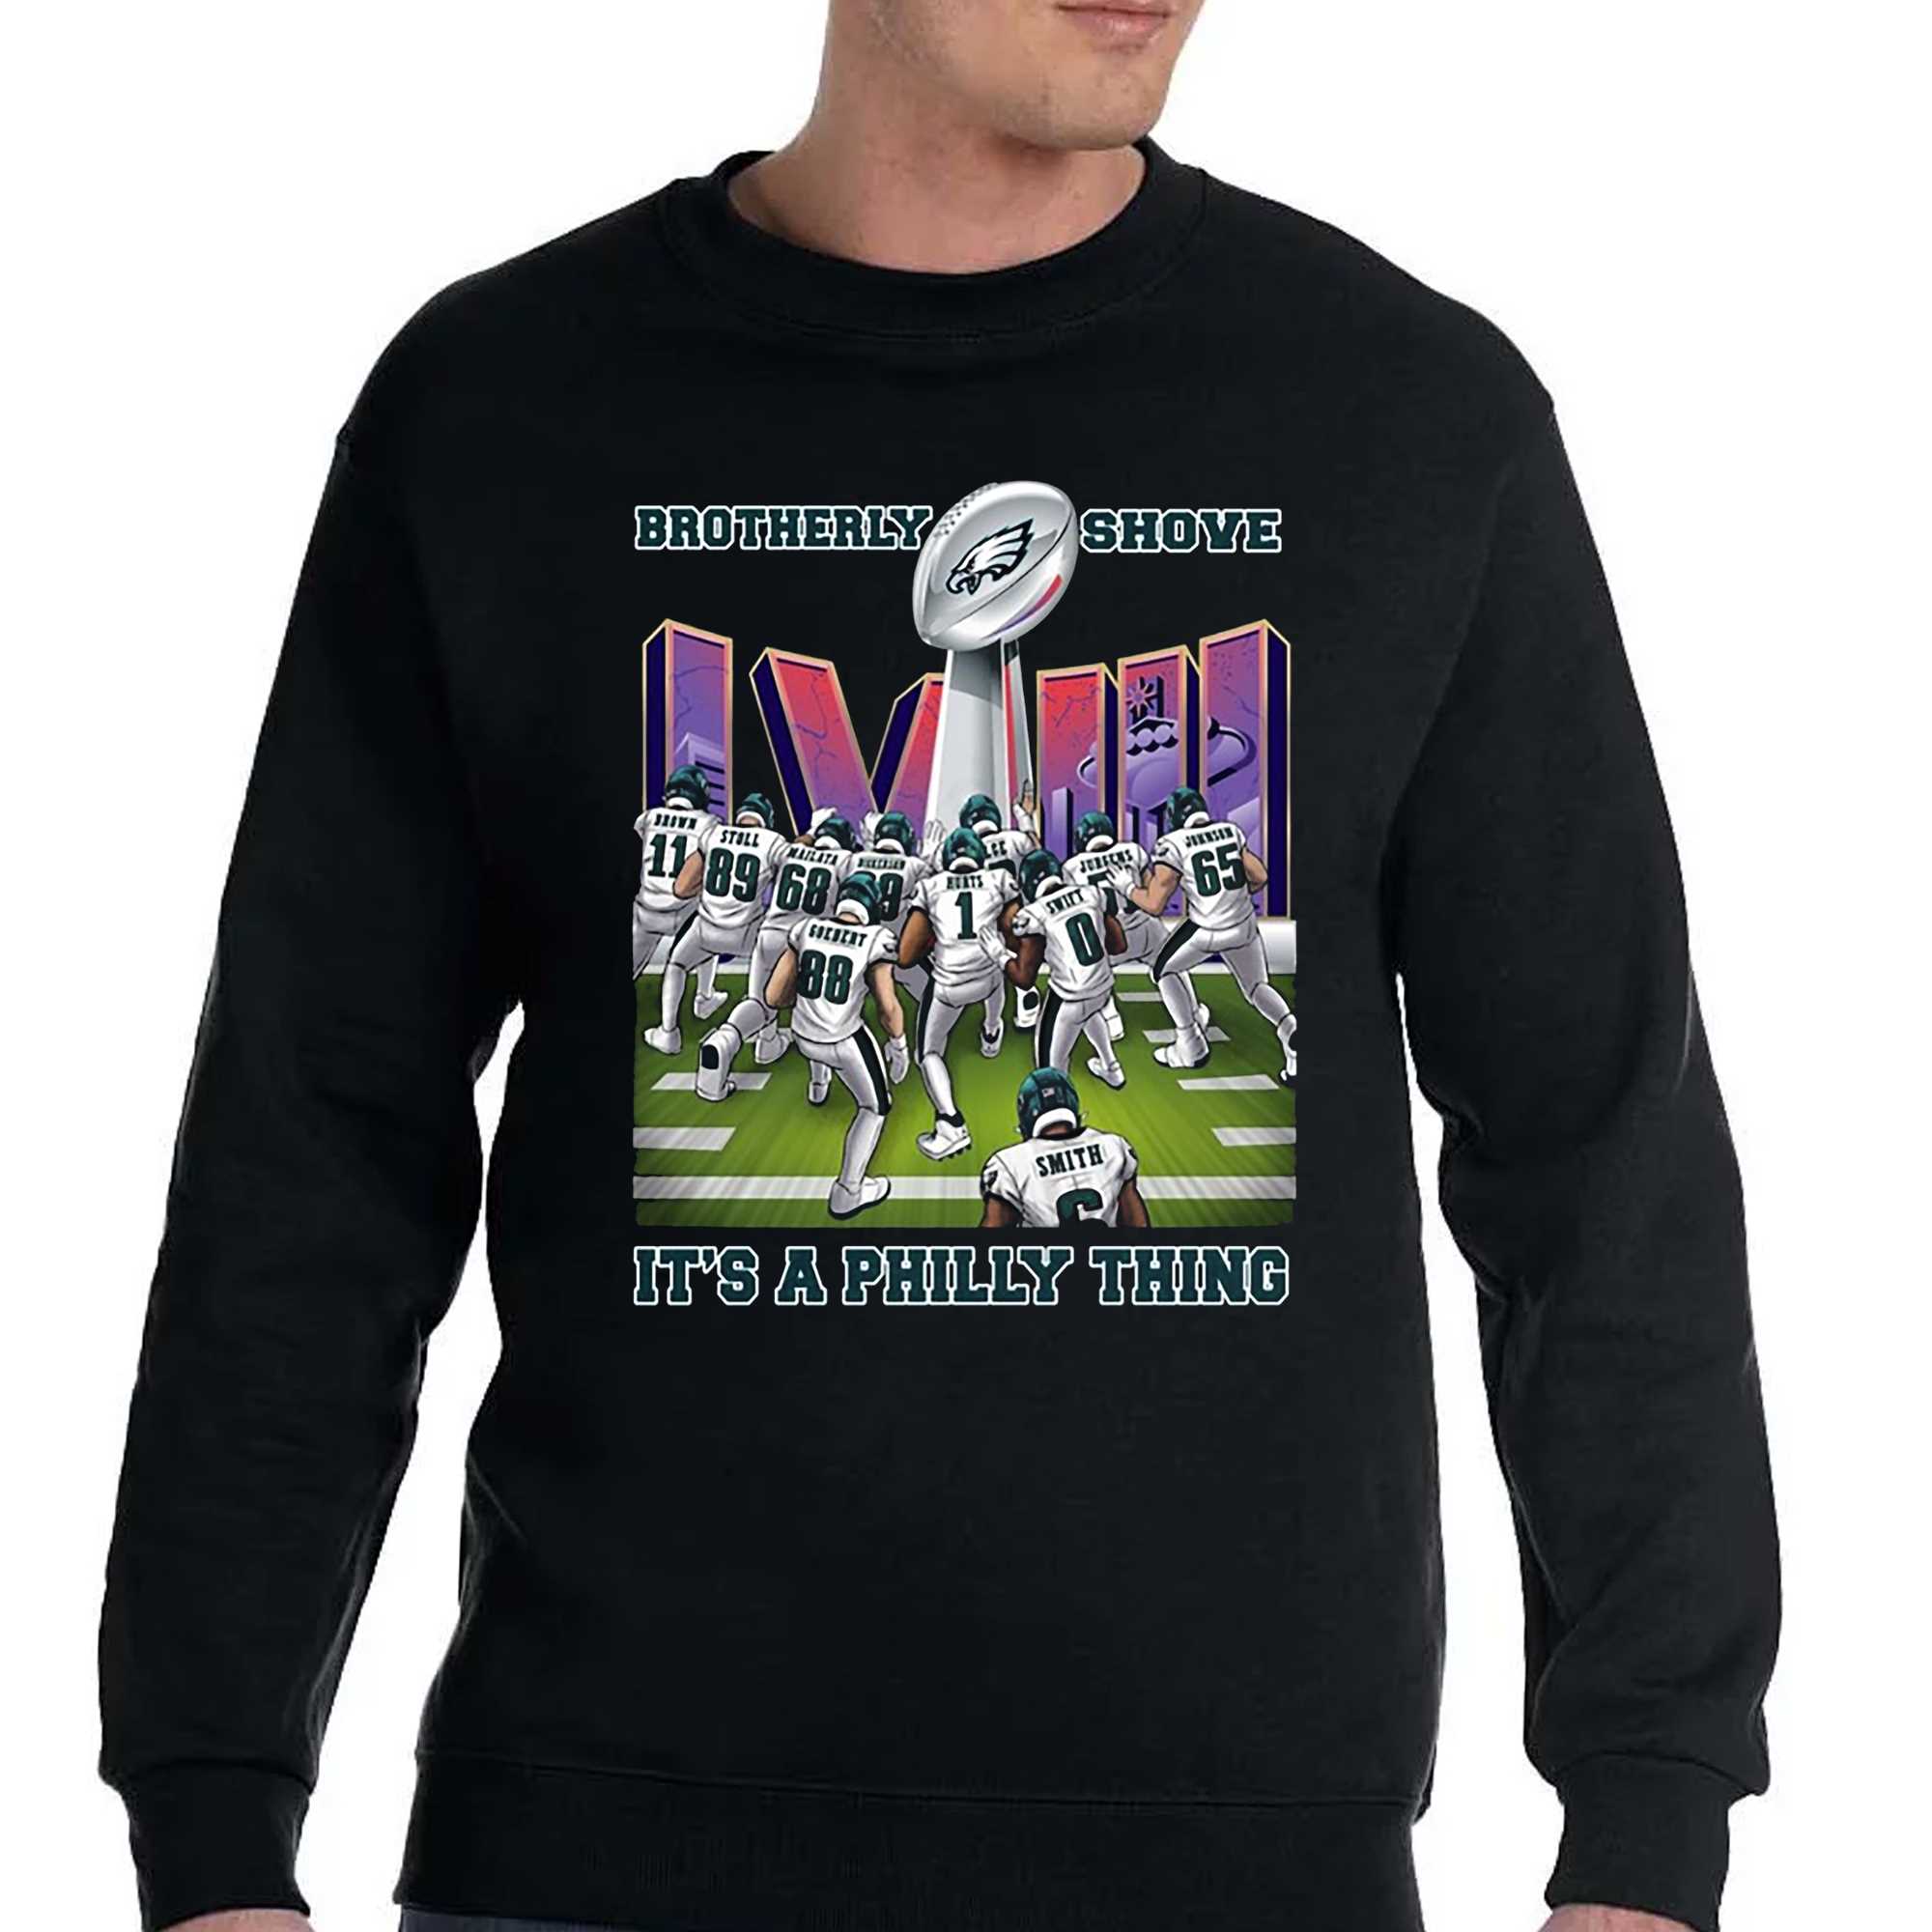 It's a Philly Thing Football Eagles | Essential T-Shirt